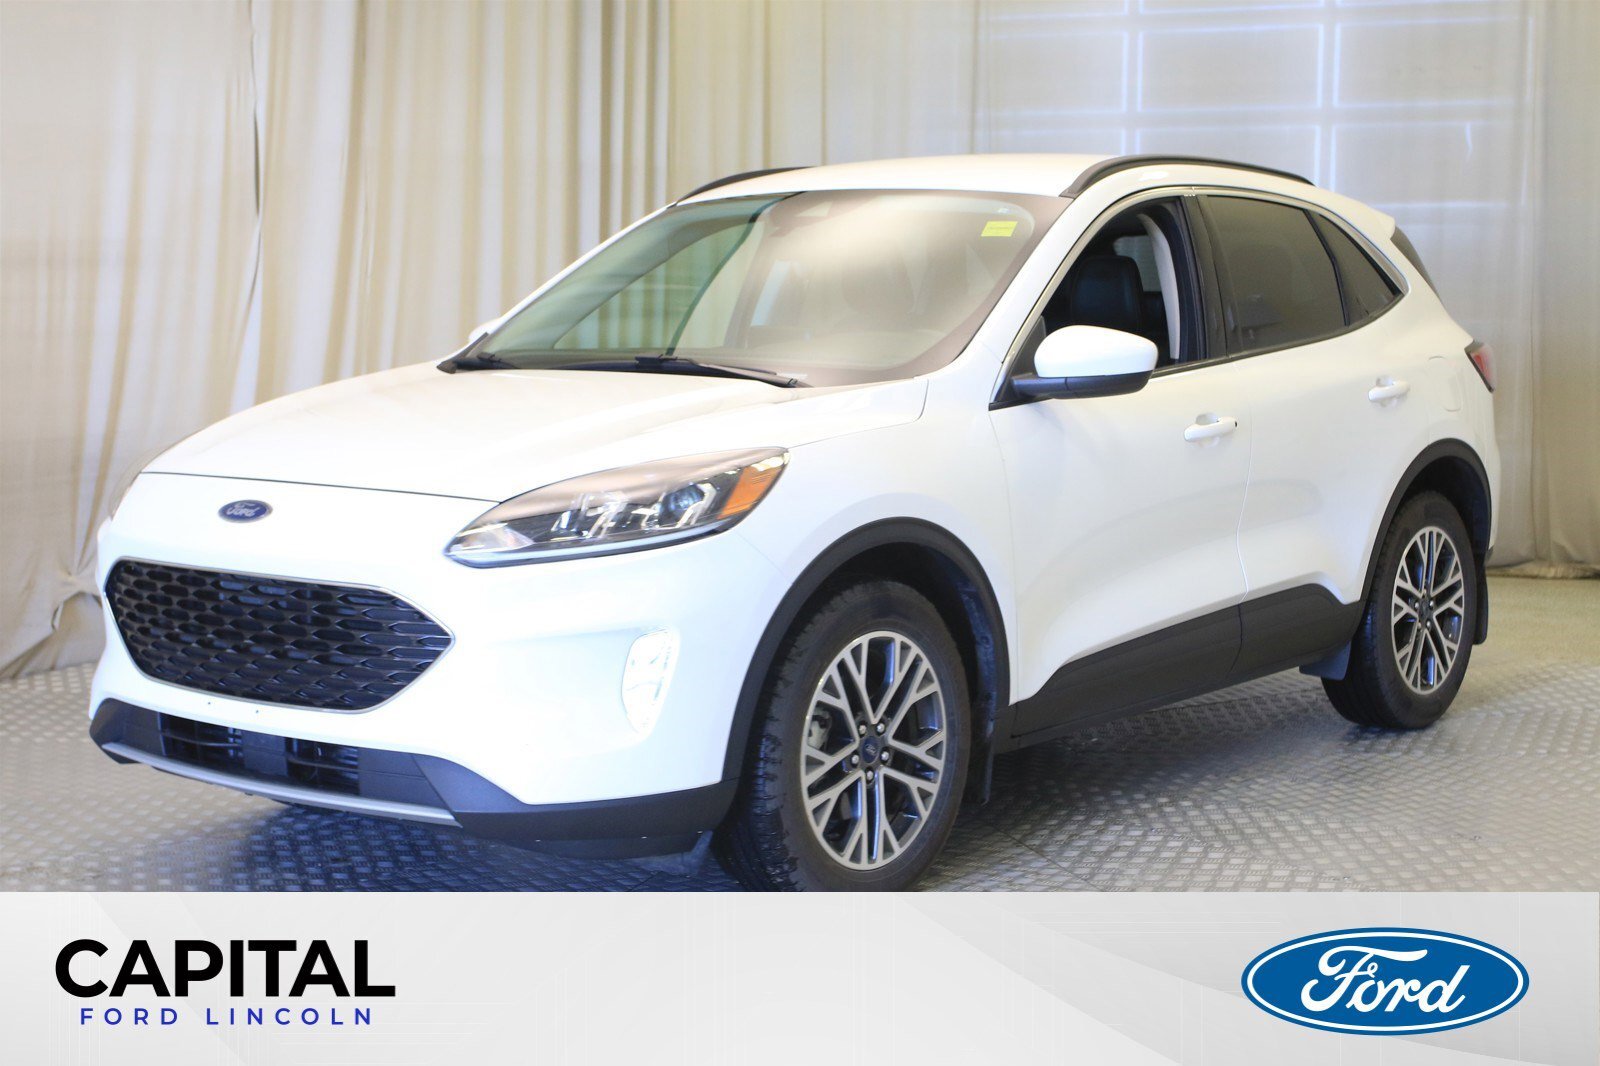 2020 Ford Escape SEL AWD **One Owner, Local Trade, Leather, Navigat